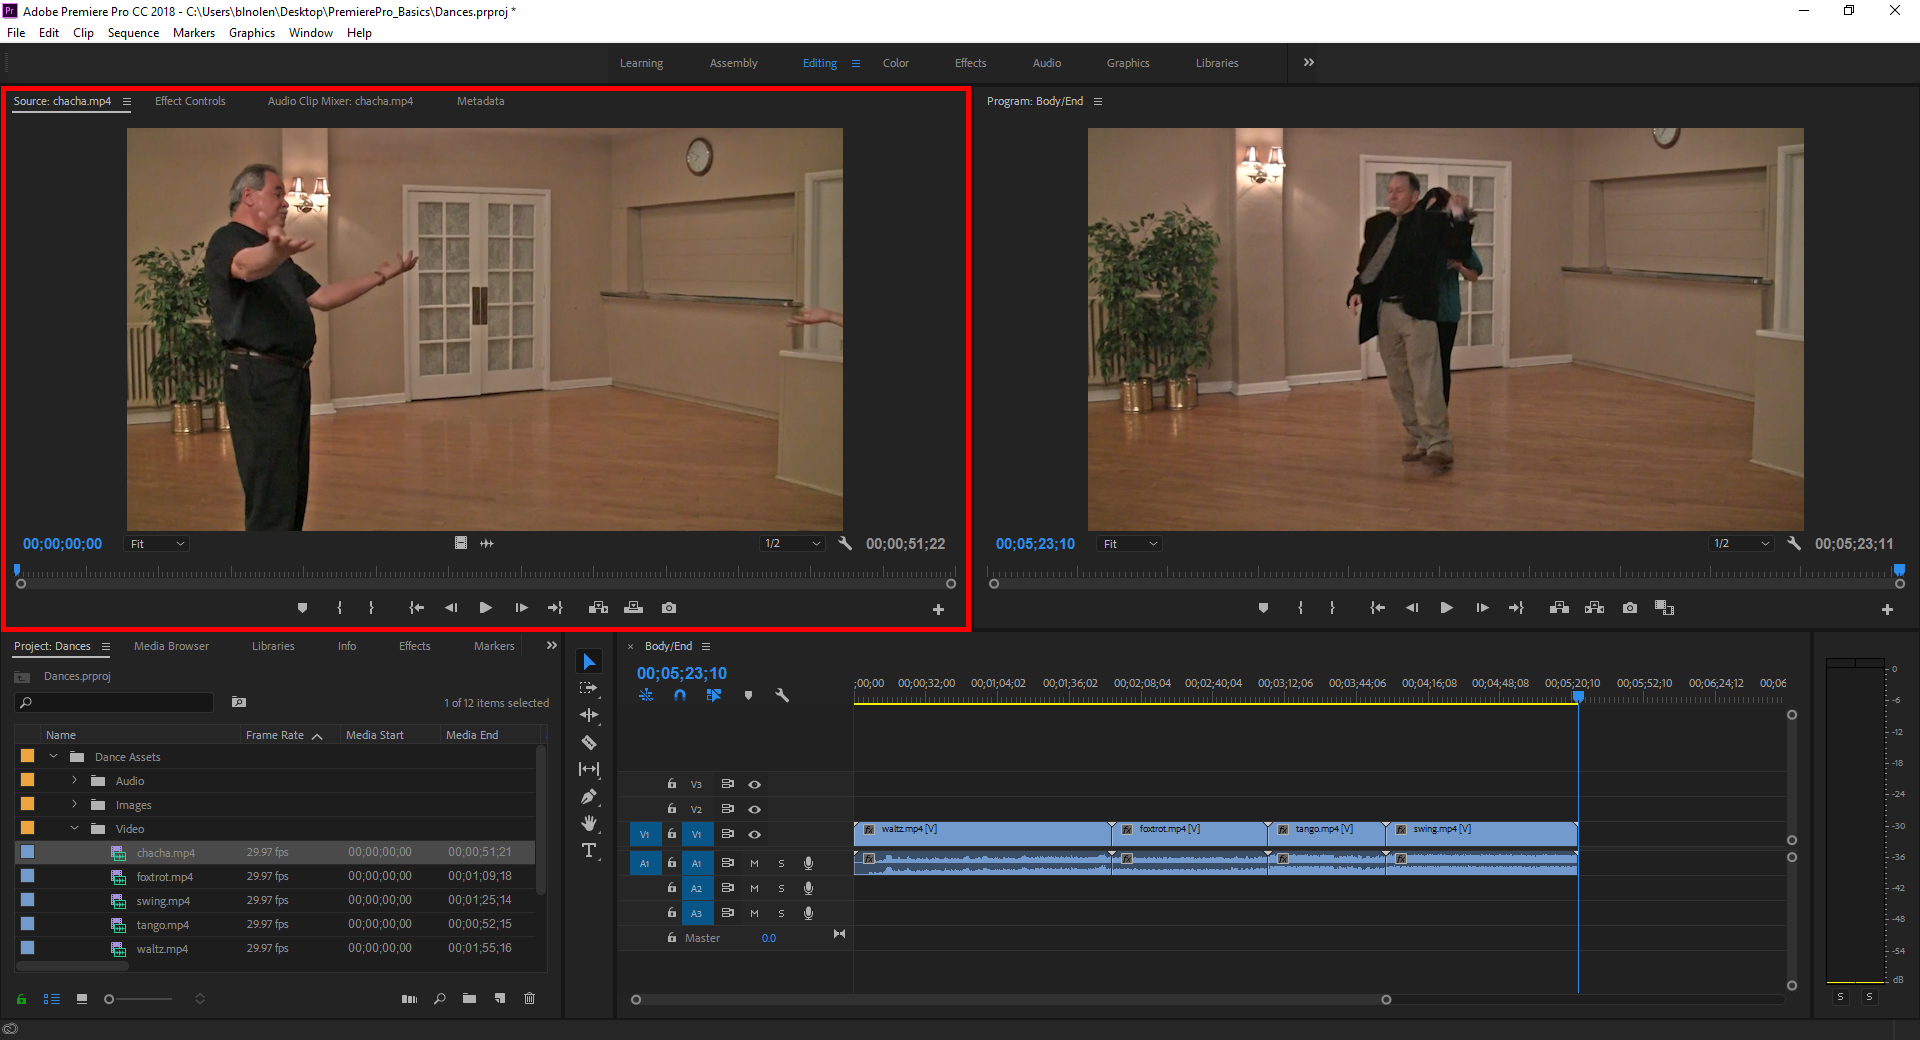 Premiere Pro interface, with the Source Monitor highlighted with a red rectangle around it.